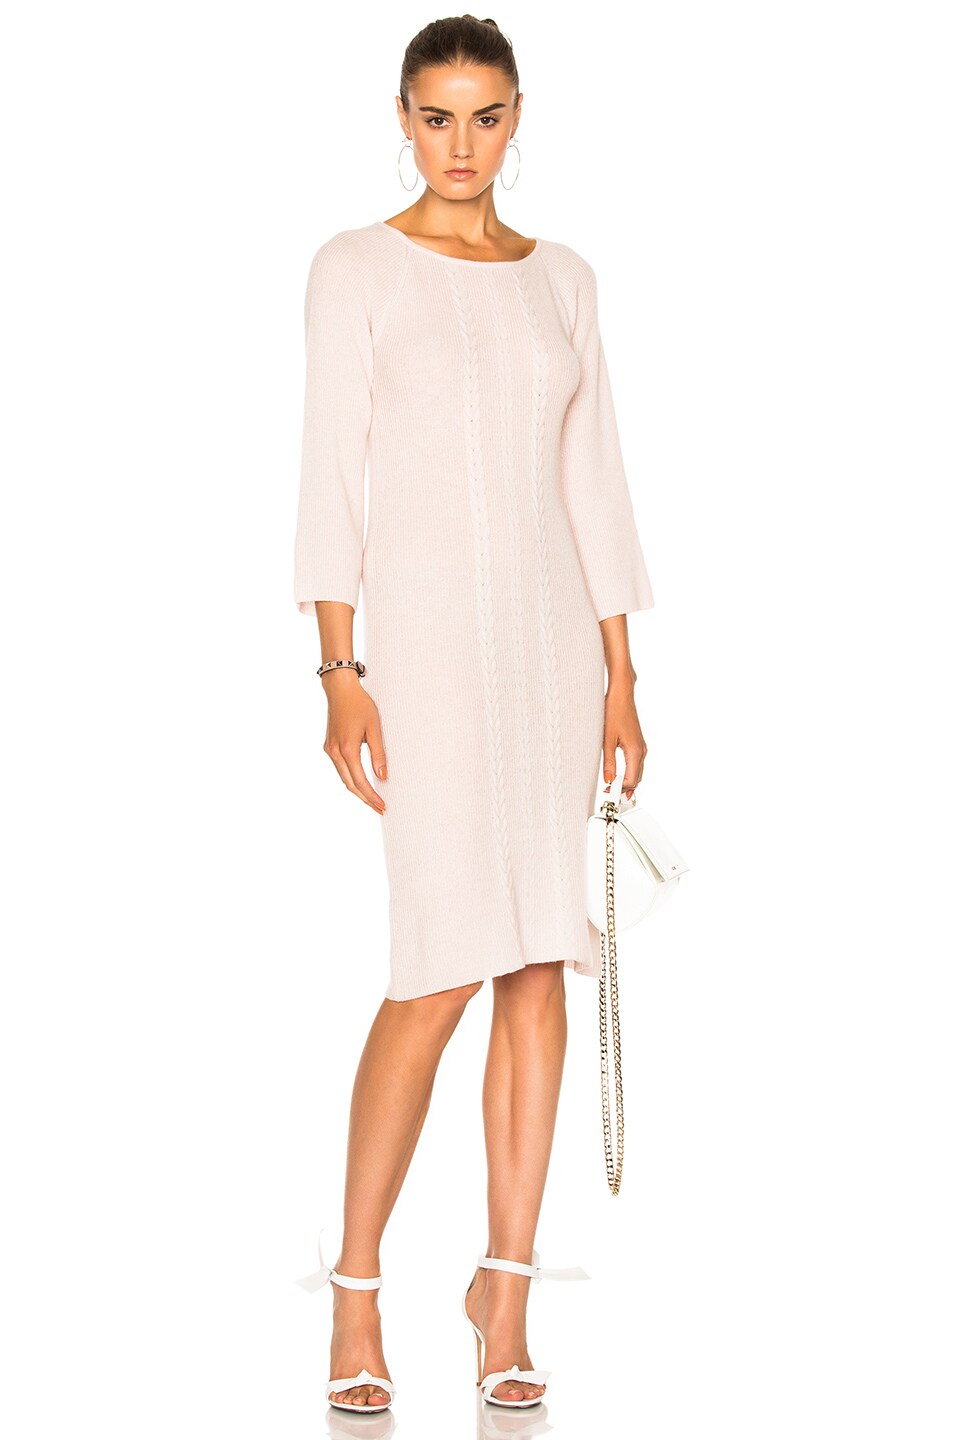 Image 1 of Ryan Roche for FWRD Sweater Dress in Champagne Pink